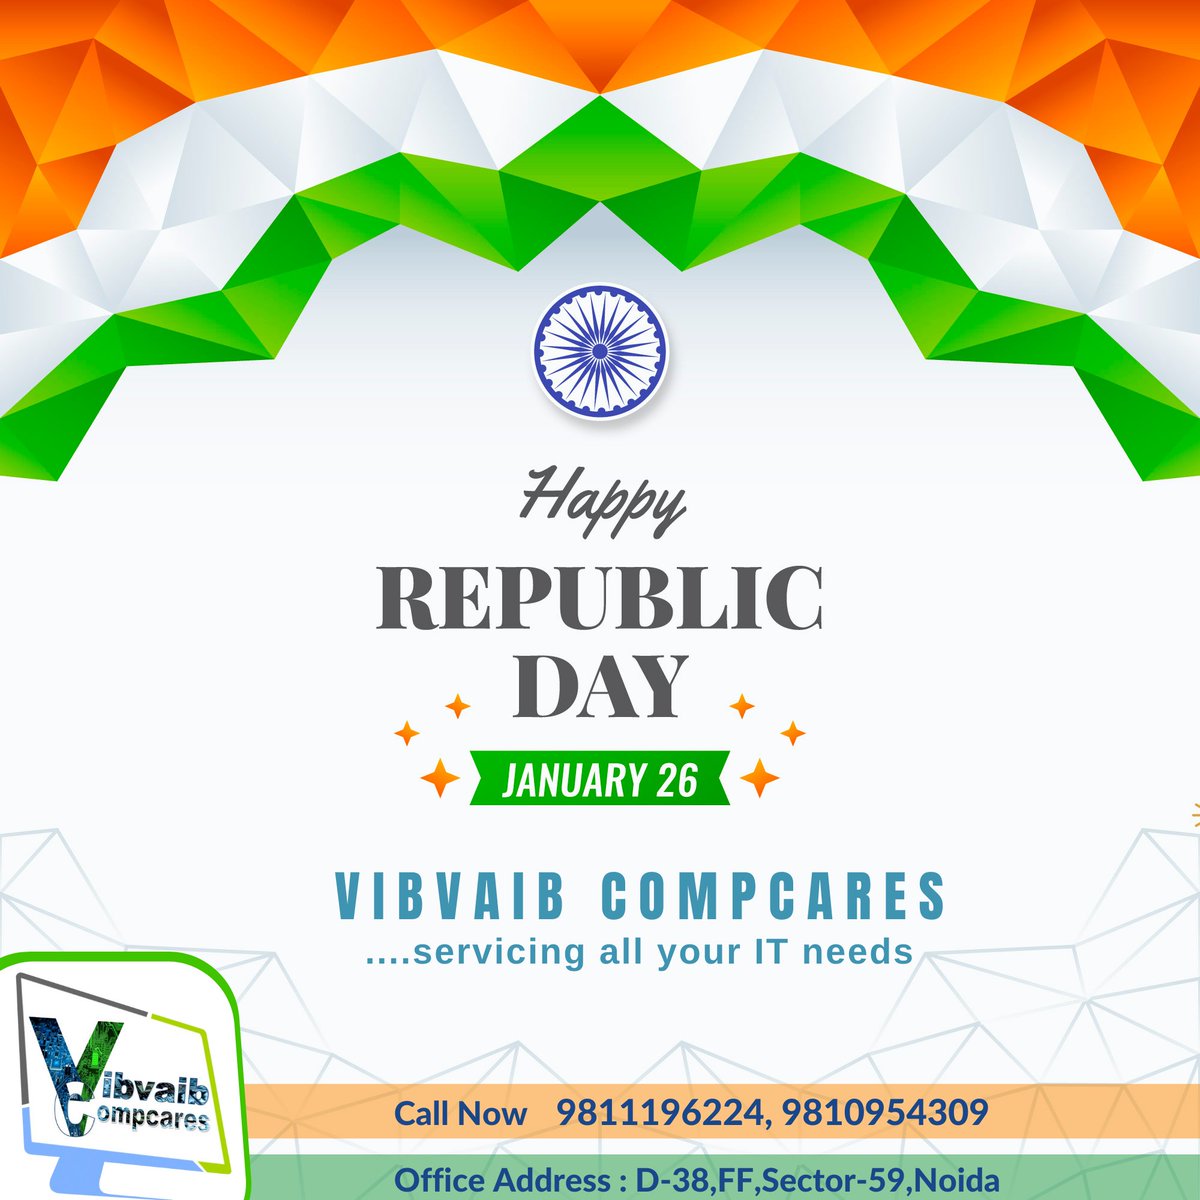 'Wishing you a very Happy Republic Day'
.
let us remember the golden heritage of our country and feel proud to be a part of India. 
.
📞On One call +91 9811196224 and your laptop is repaired 💻 Our services at your Doorsteps
.
#happyrepublicday #laptoprepairing #pcrepairing